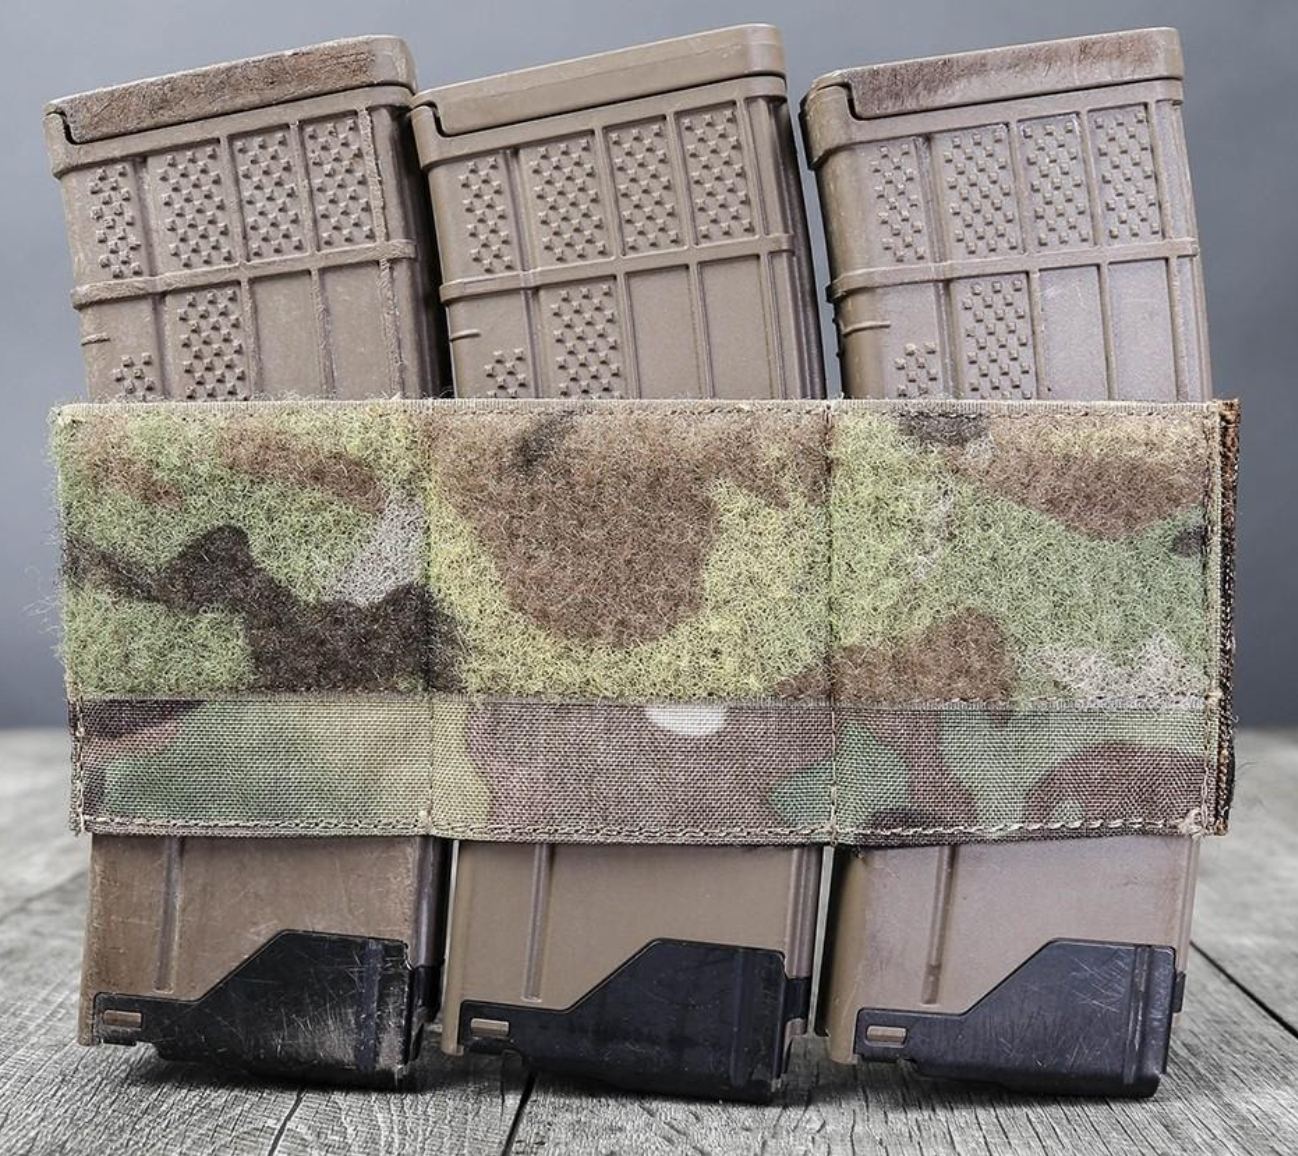 Esstac KYWI Triple Pouch Magazine Pouch in camouflage green